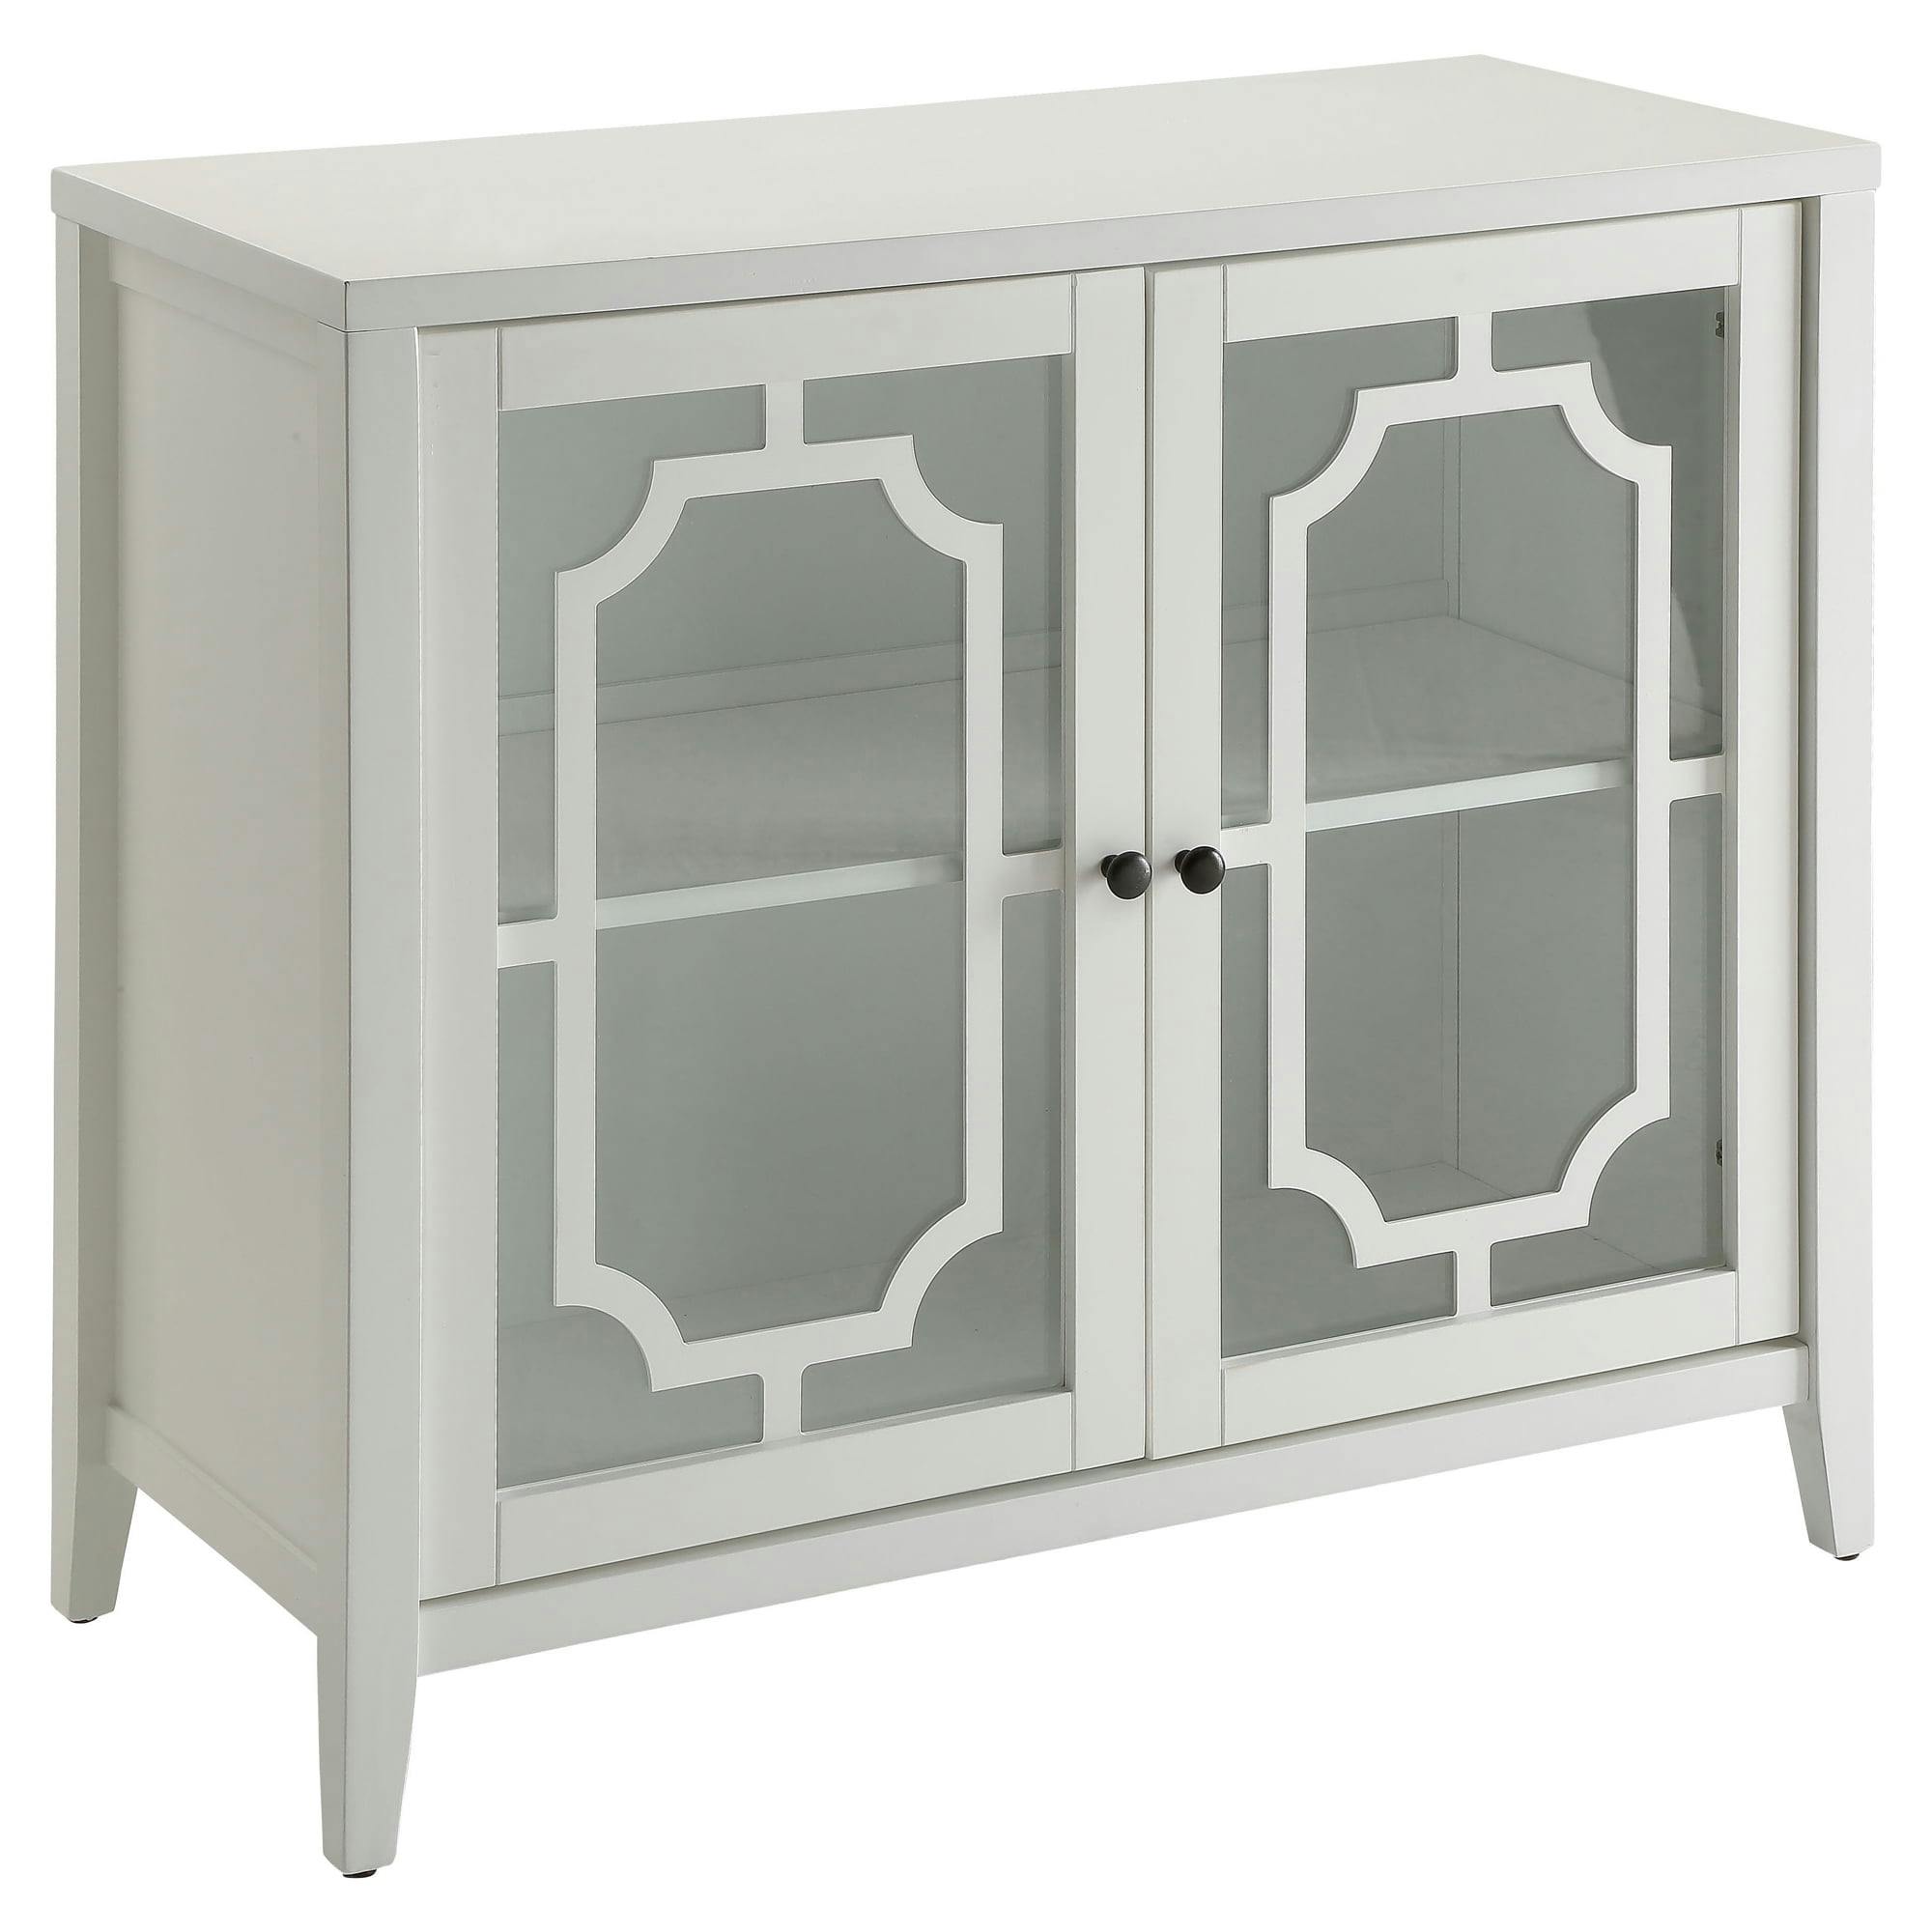 Classic Romantic White Wooden Console Table with Glass Storage